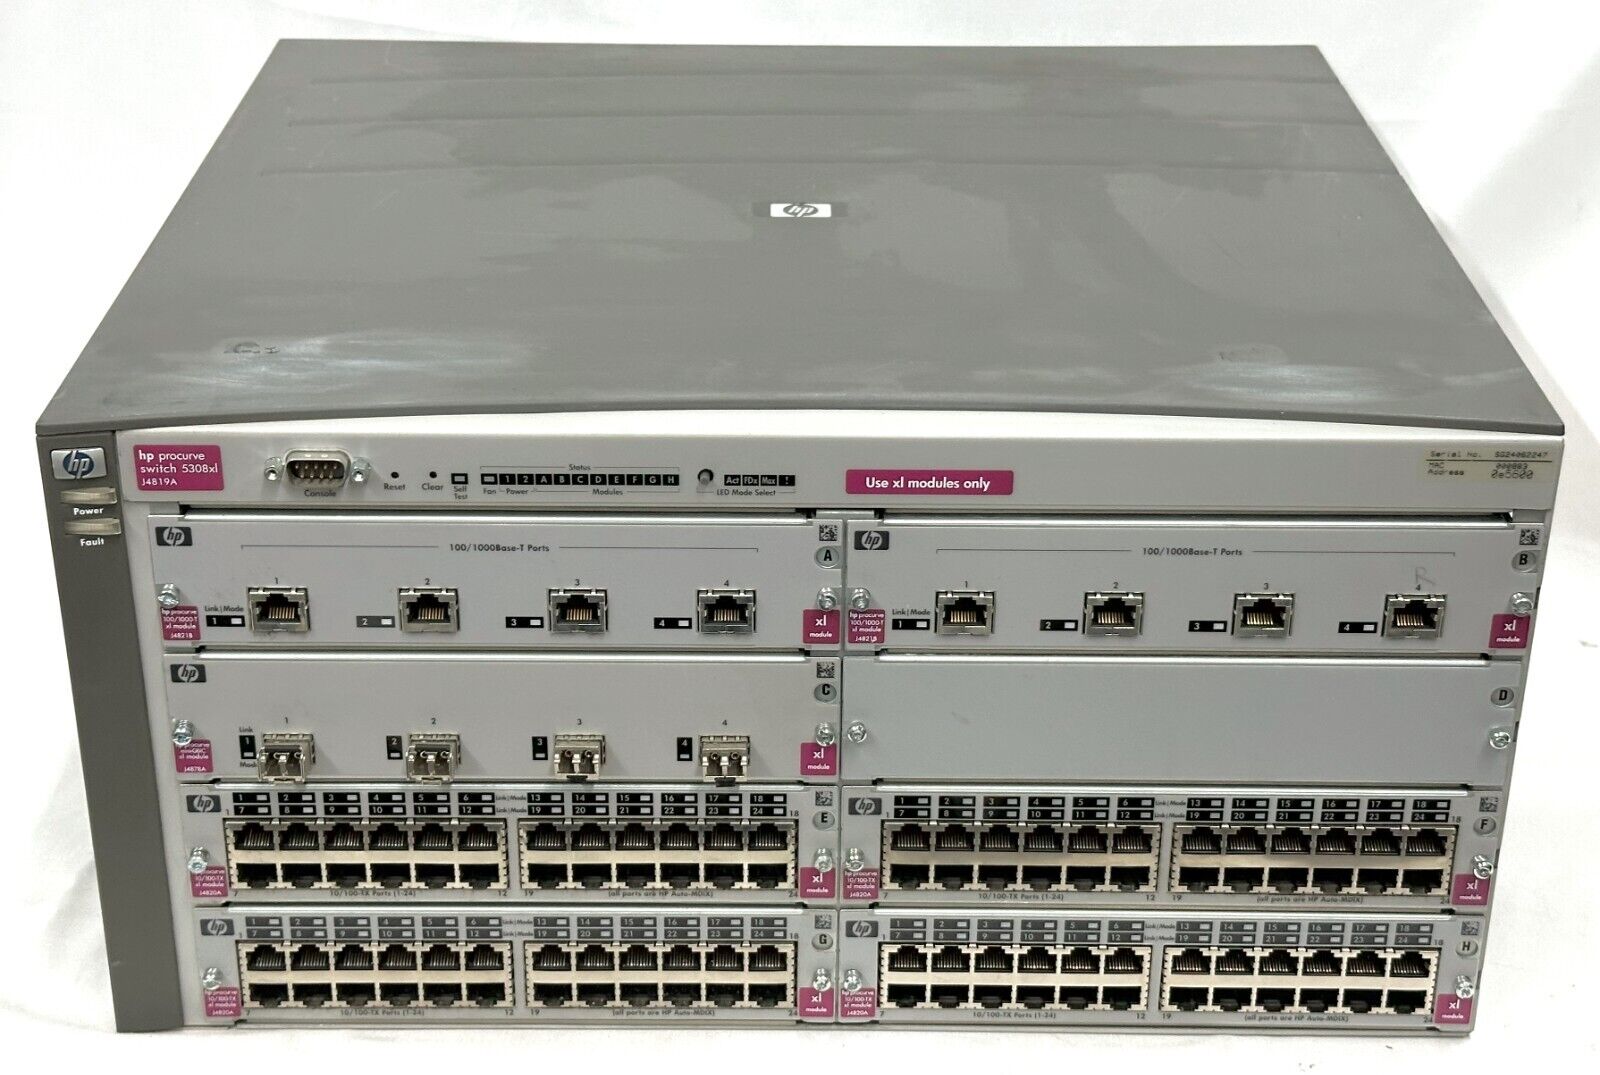 HP Procurve Switch 5308xl J4819A w/ 2x Mini-GBIC J4878A, 2x J4821A 100/1000-T